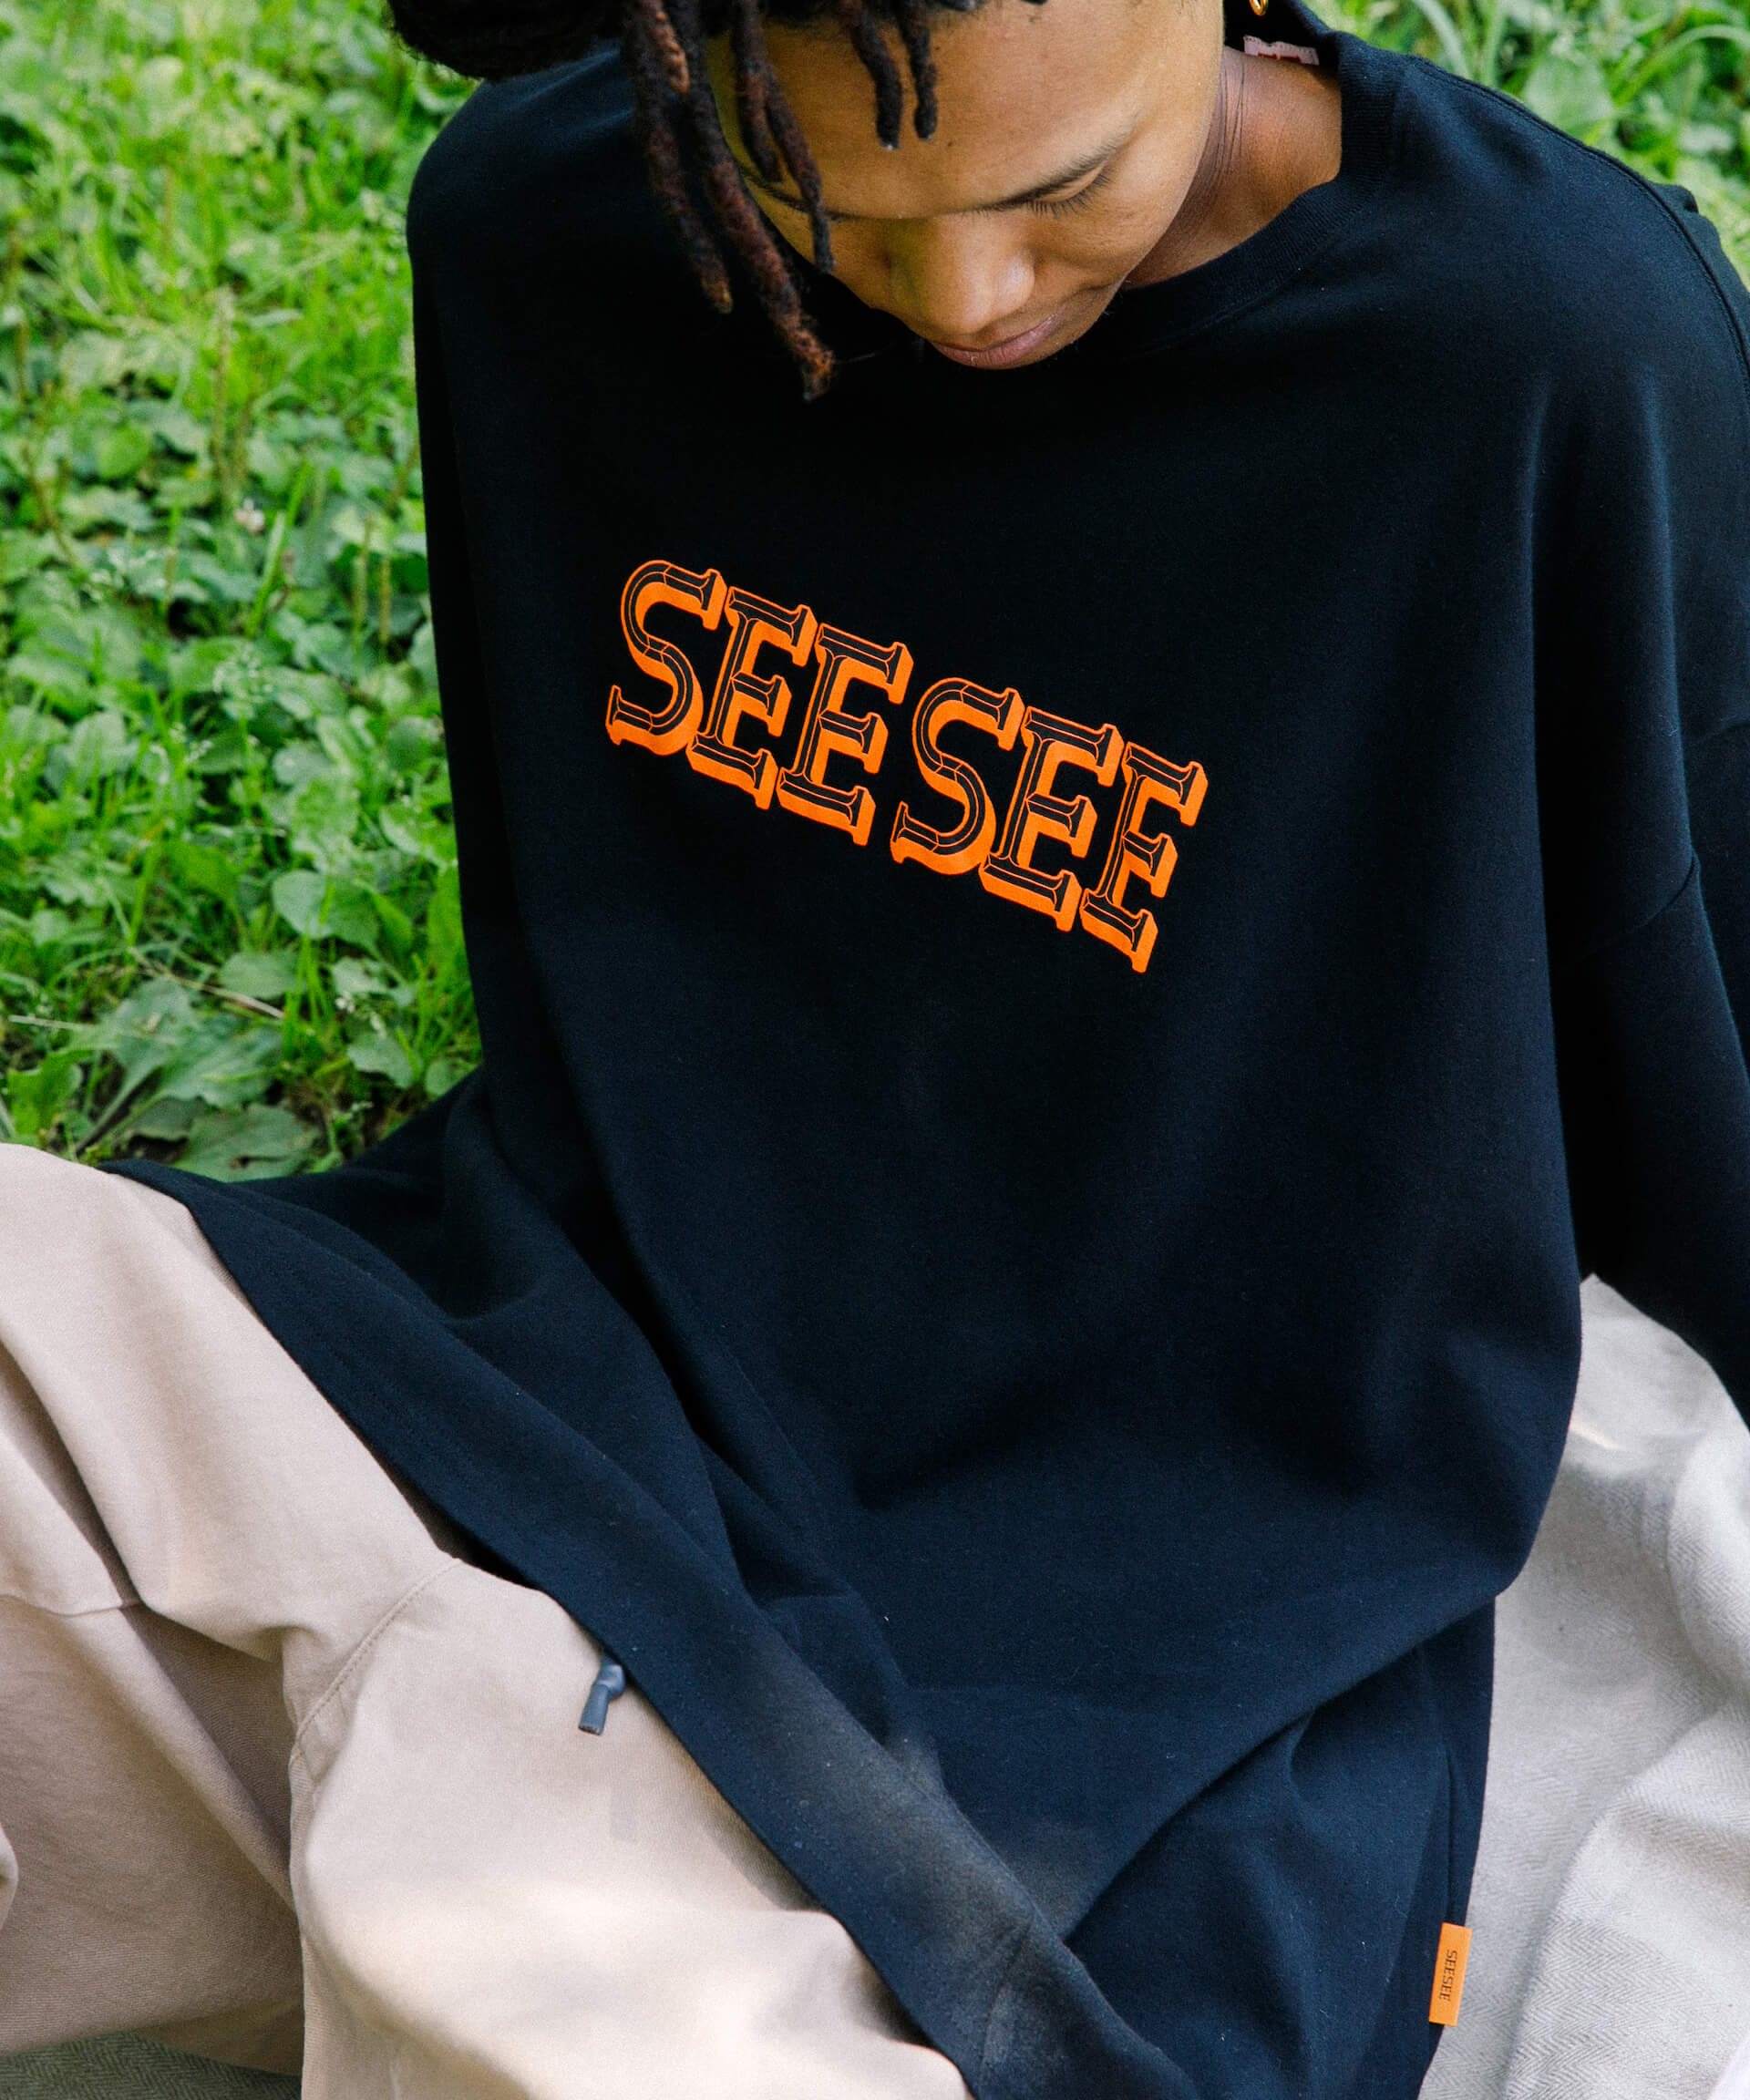 「SEESEE」TシャツコレクションがURBAN RESEARCH BUYERS SELECTにてリリース fashion230614_seesee-03